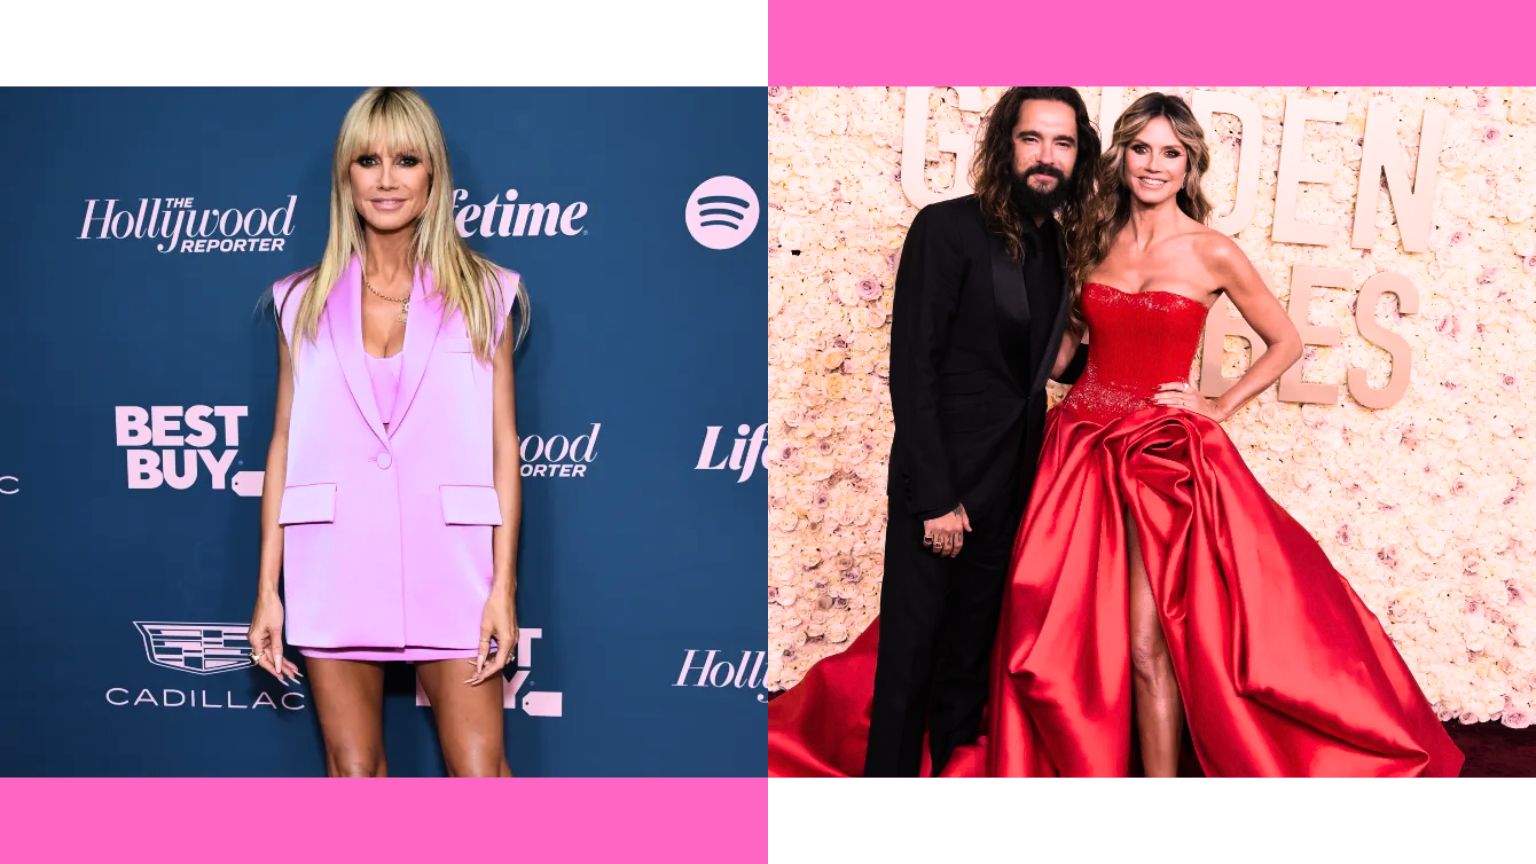 Heidi Klum's 50th semi-nude photos labeled 'desperate,' exposing vulnerability over a 16-year marriage age gap